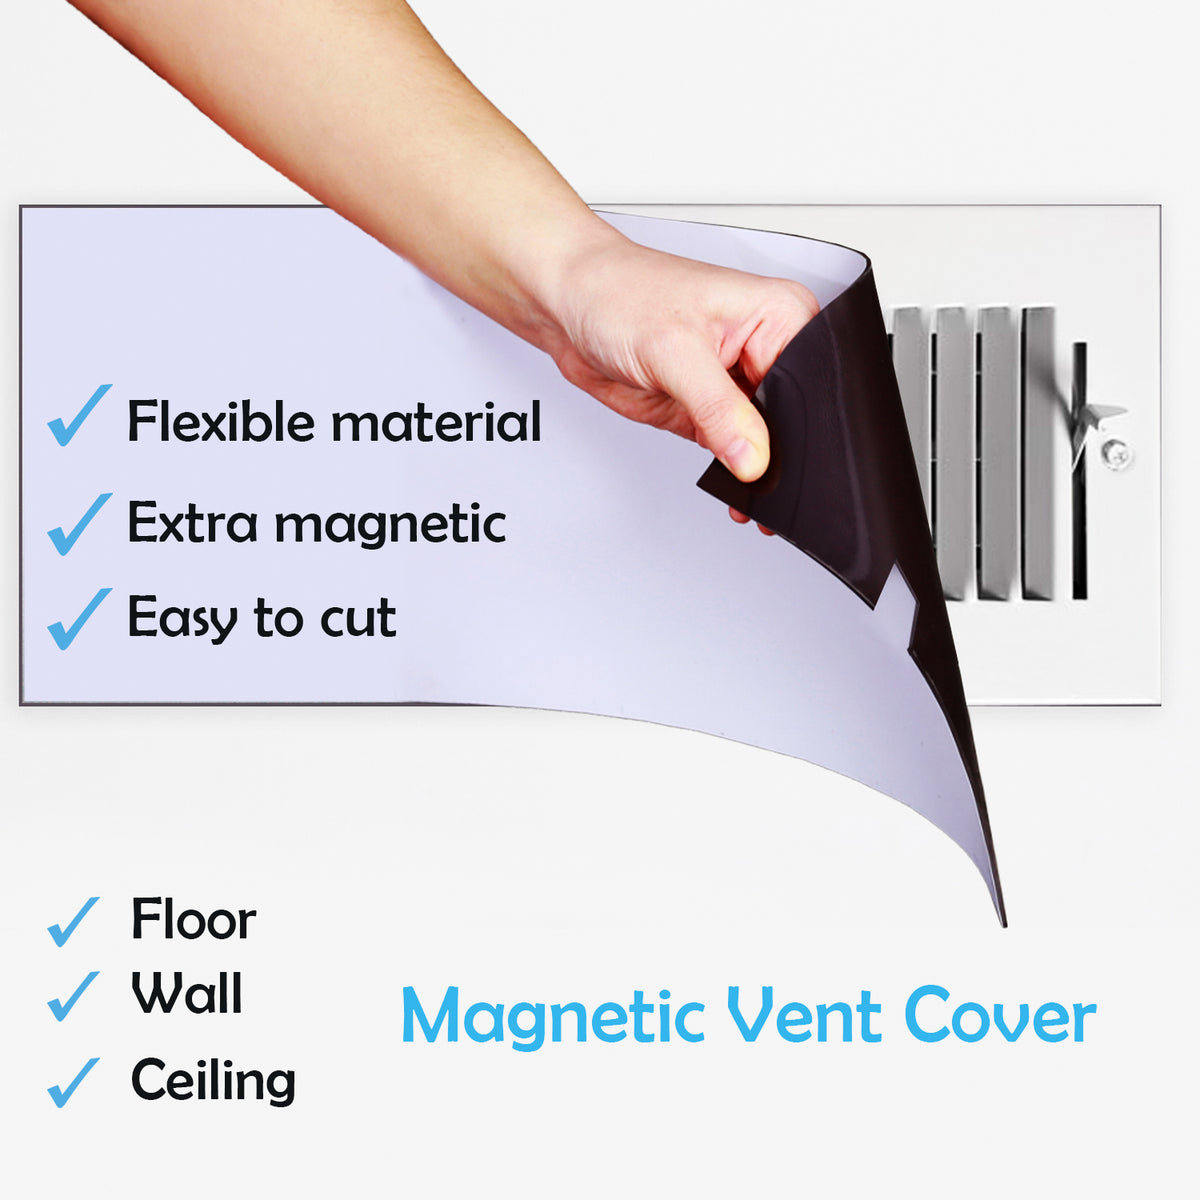 Magnetic Vent Cover, 8 by 15 Inches, Pack of 3 – Canopus USA